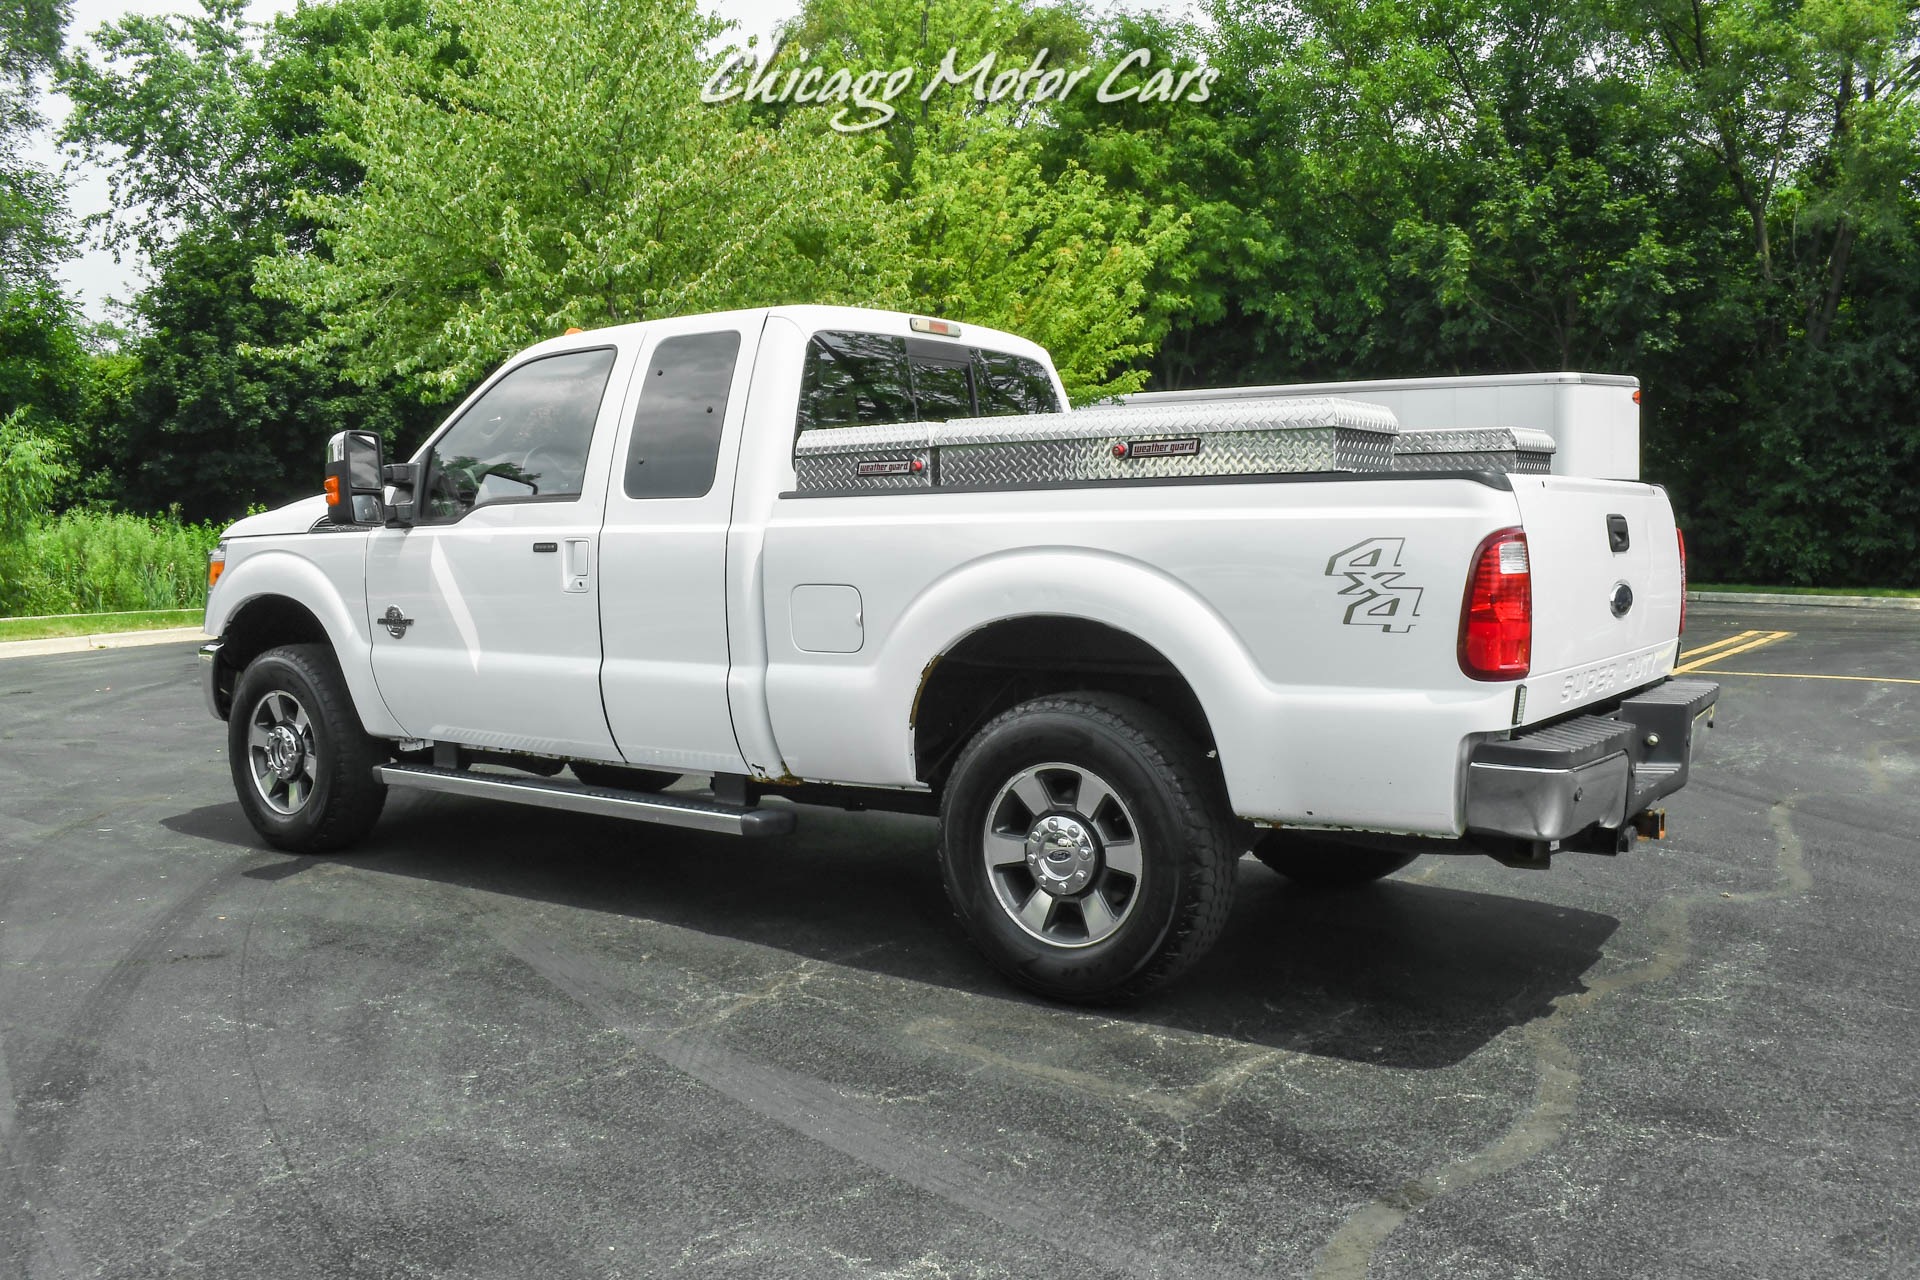 Used-2011-Ford-F-250-Super-Duty-Lariat-4x4-POWERSTROKE-DIESEL-ONE-OWNER-EXTREMELY-CLEAN